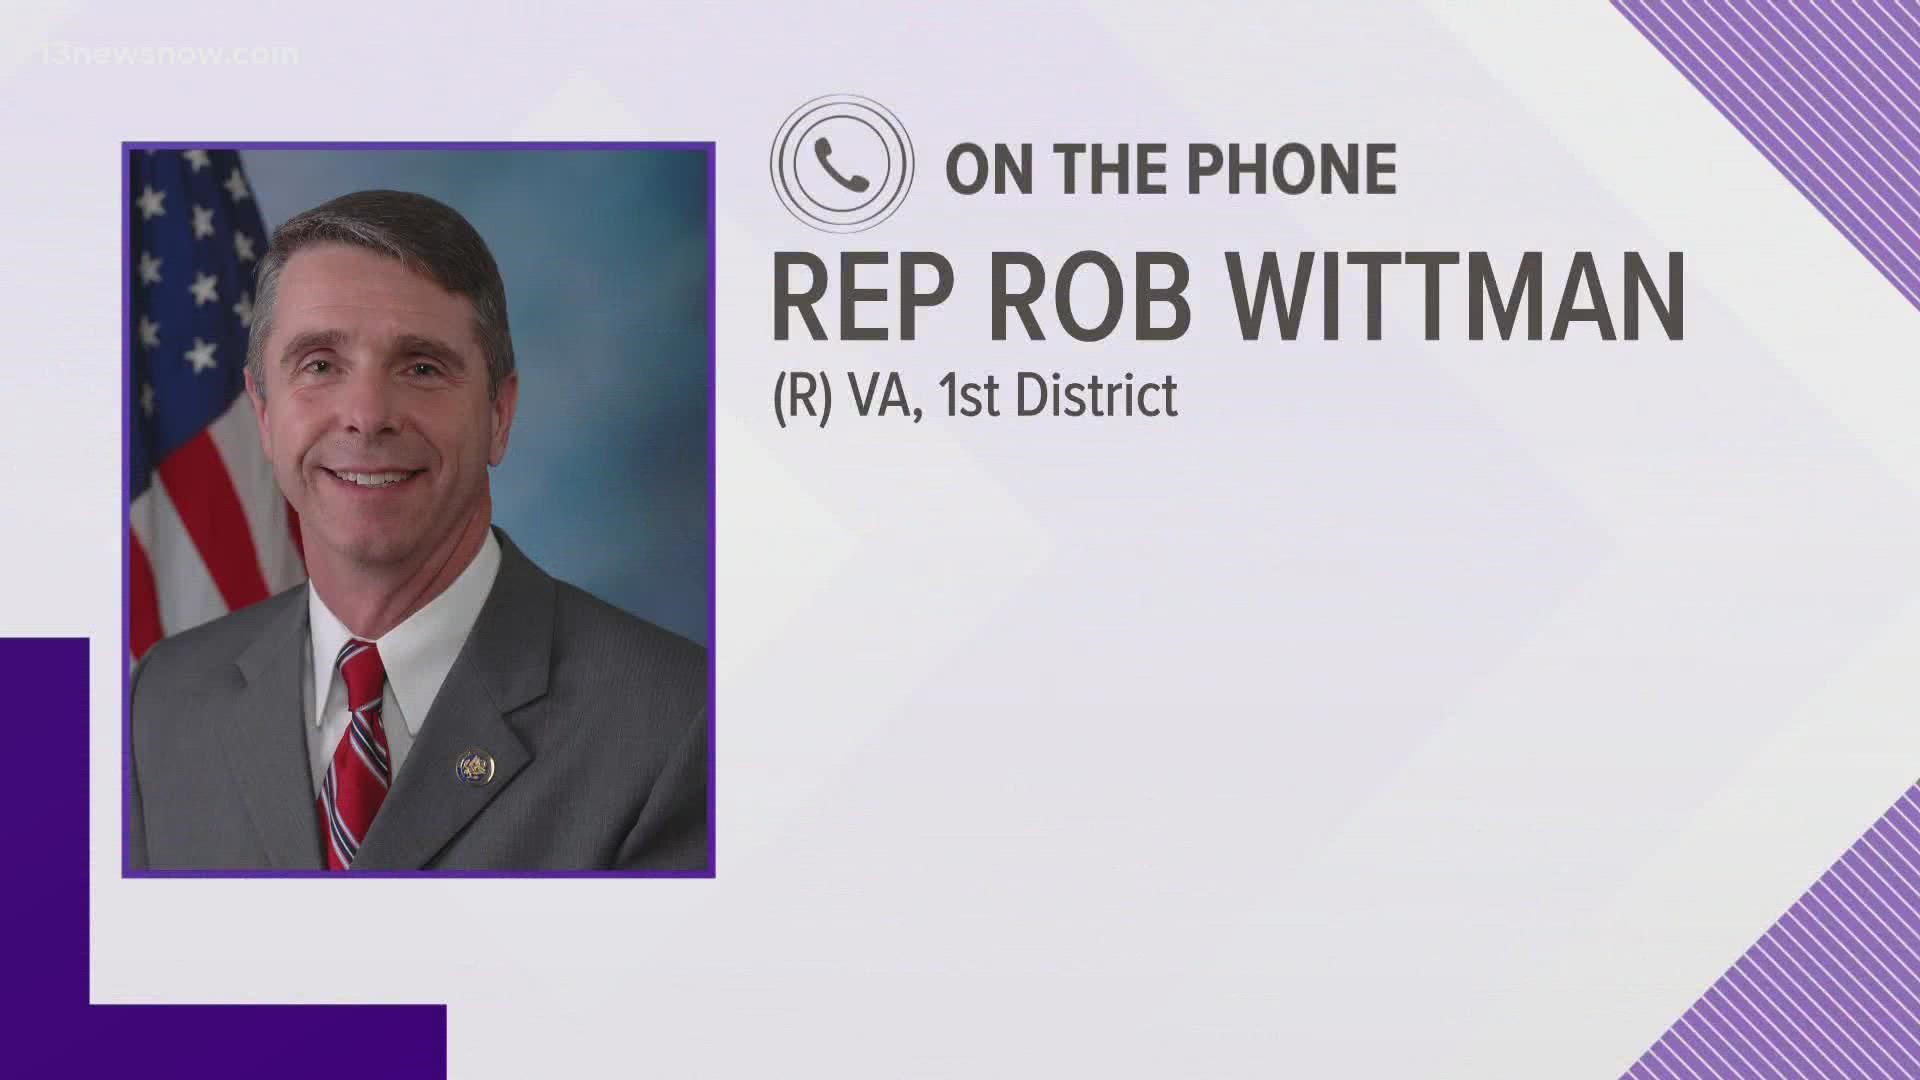 Virginia's 1st District Representative Rob Wittman signed the letter.